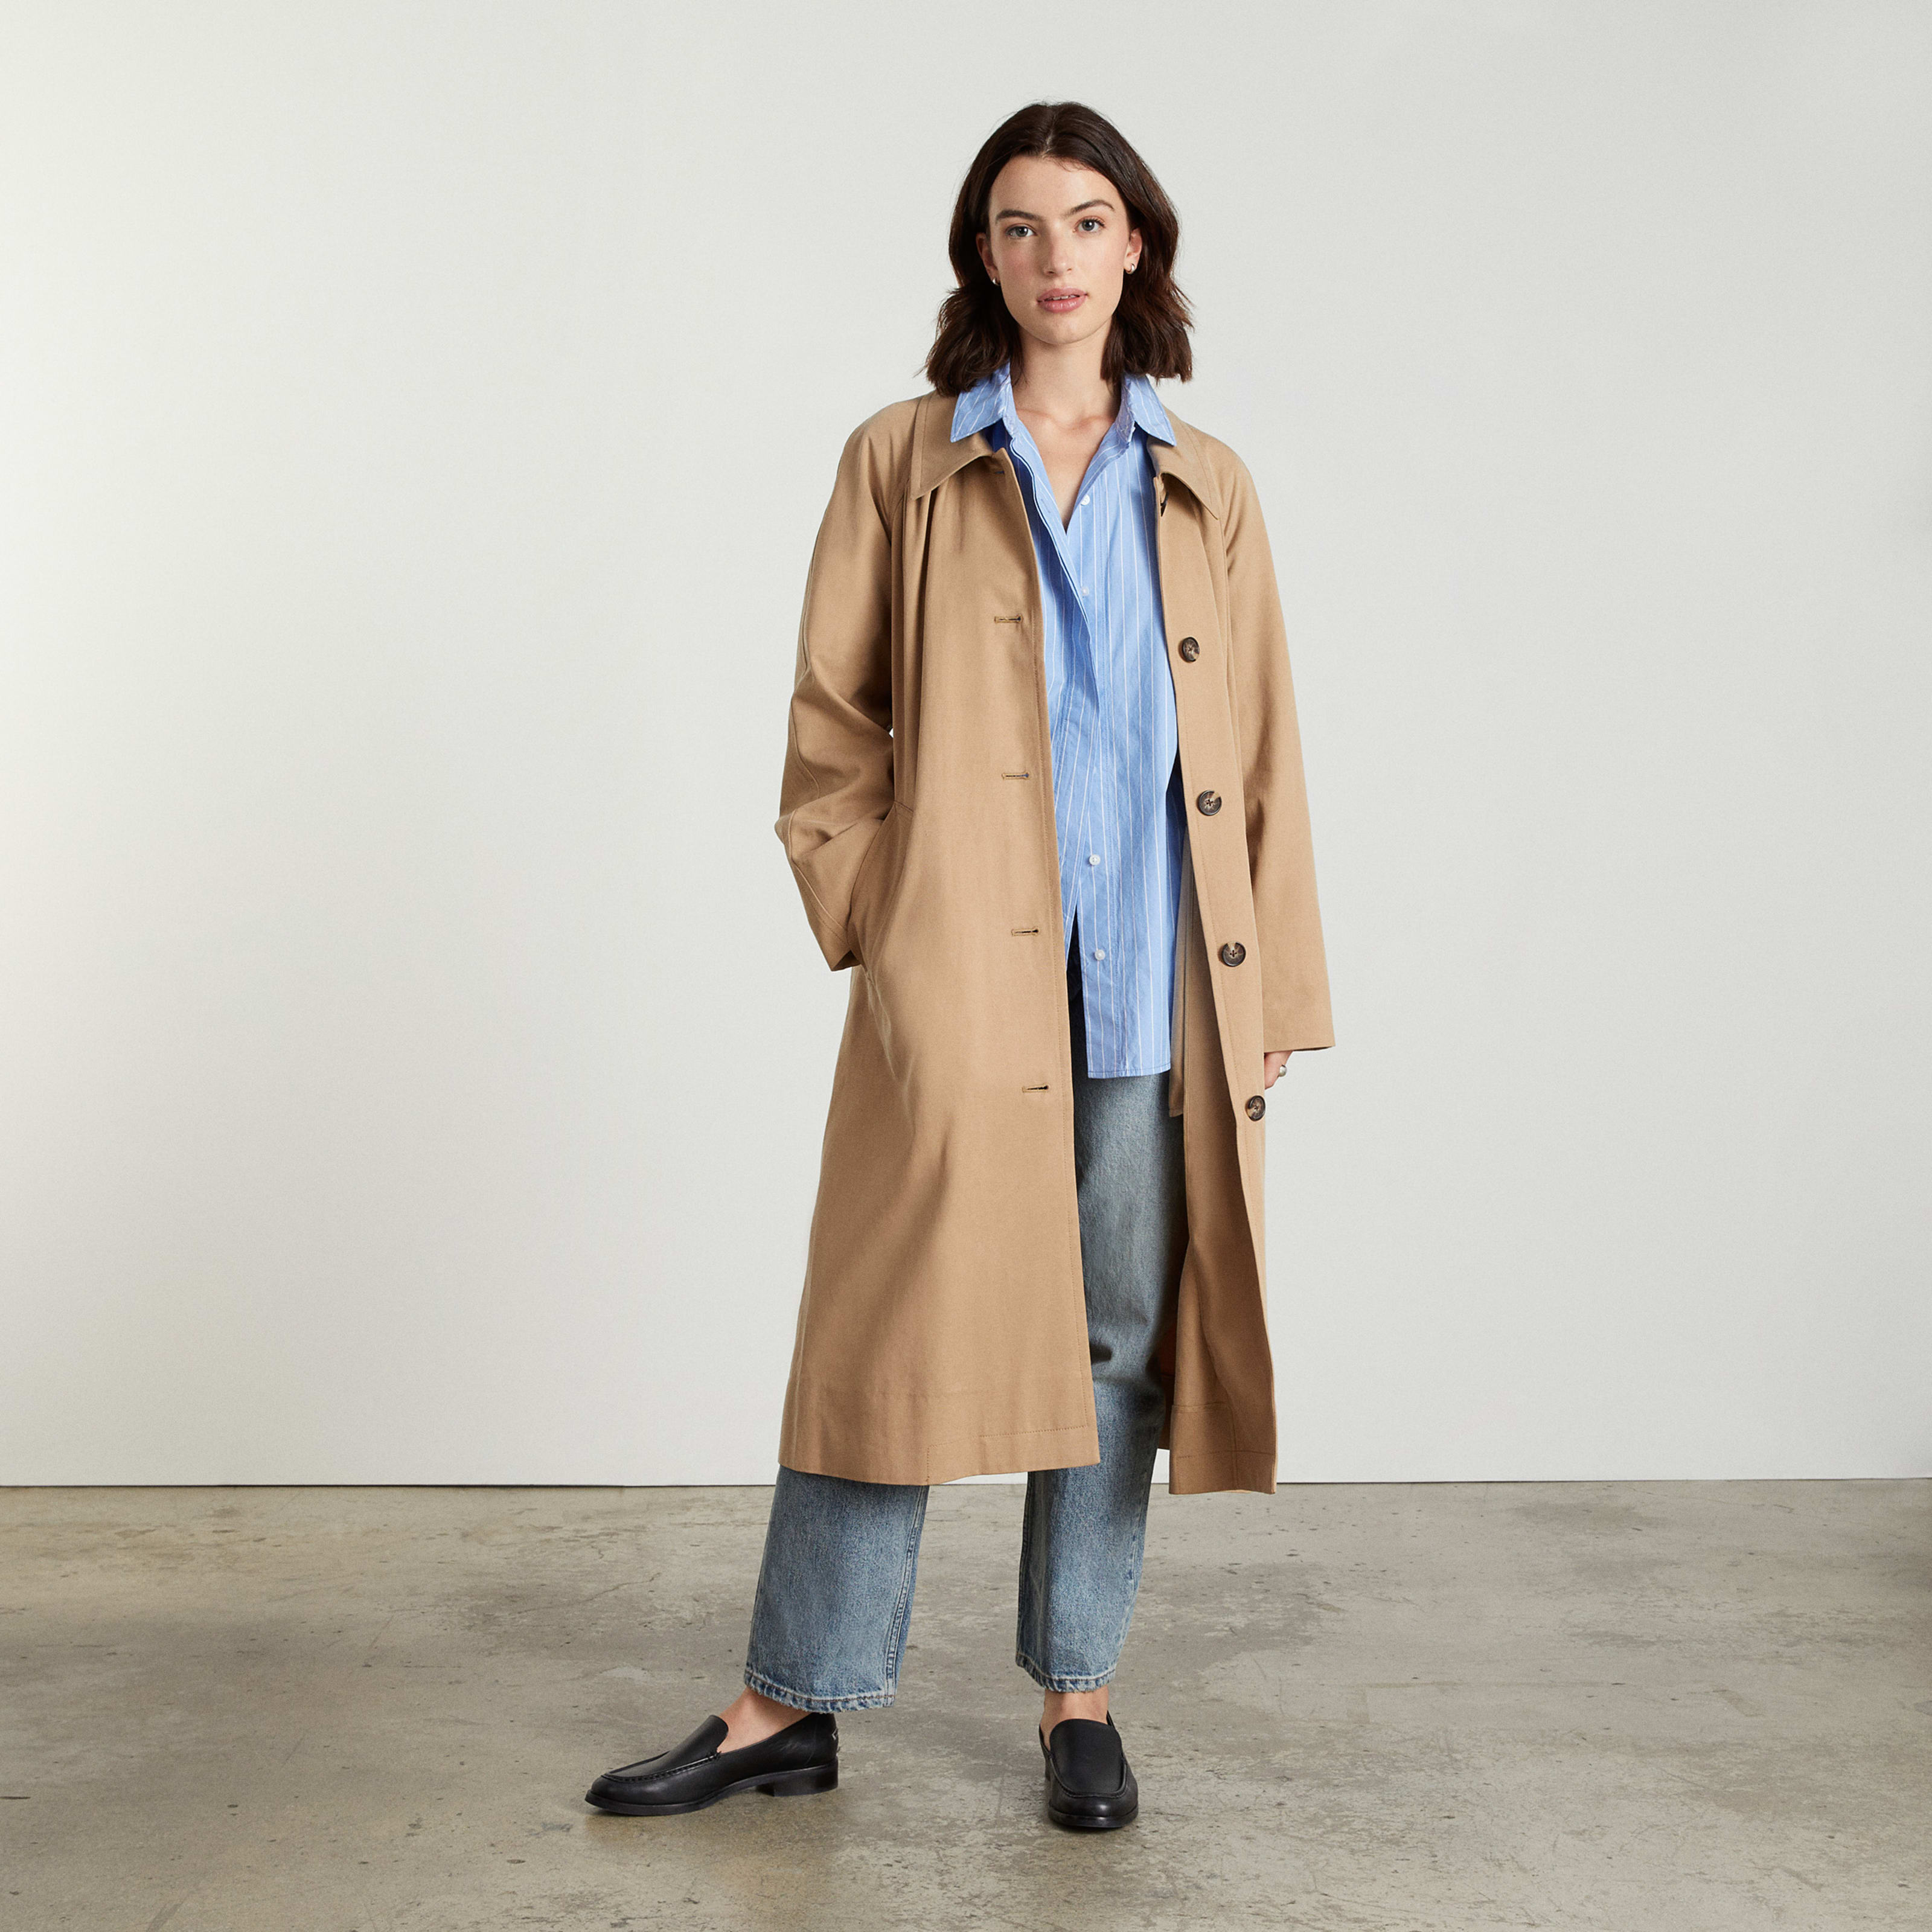 women's gathered drape trench by everlane in ash brown, size xs